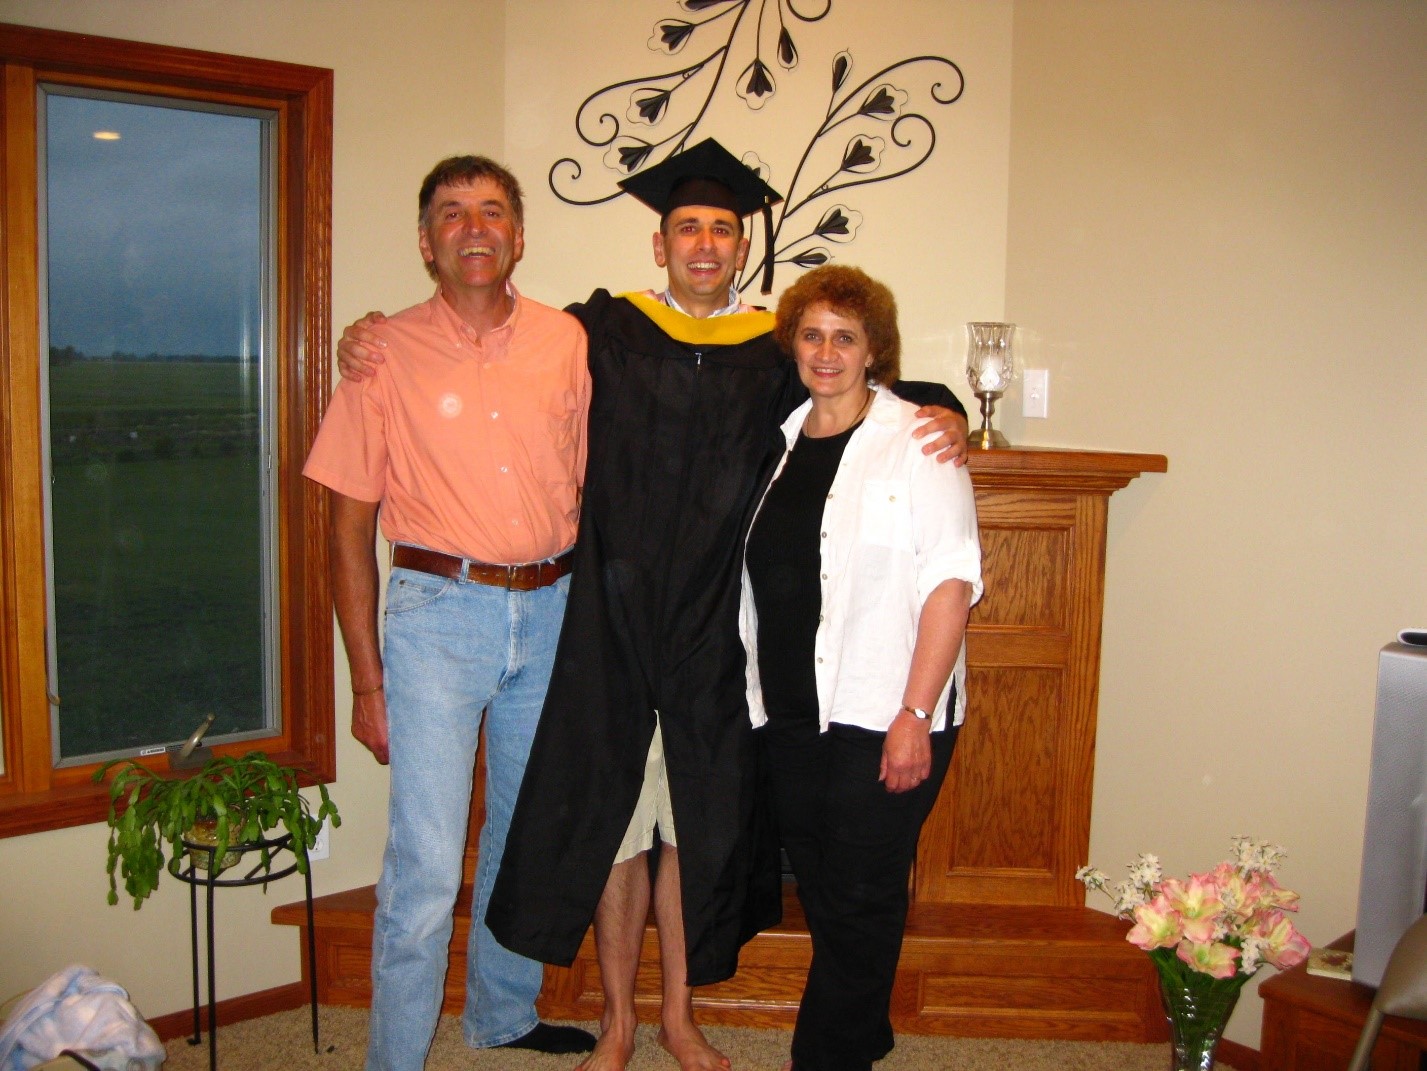 Theisen, center, celebrates with his parents, Robert and Judy, on the day he received his master’s degree from the University of North Dakota.